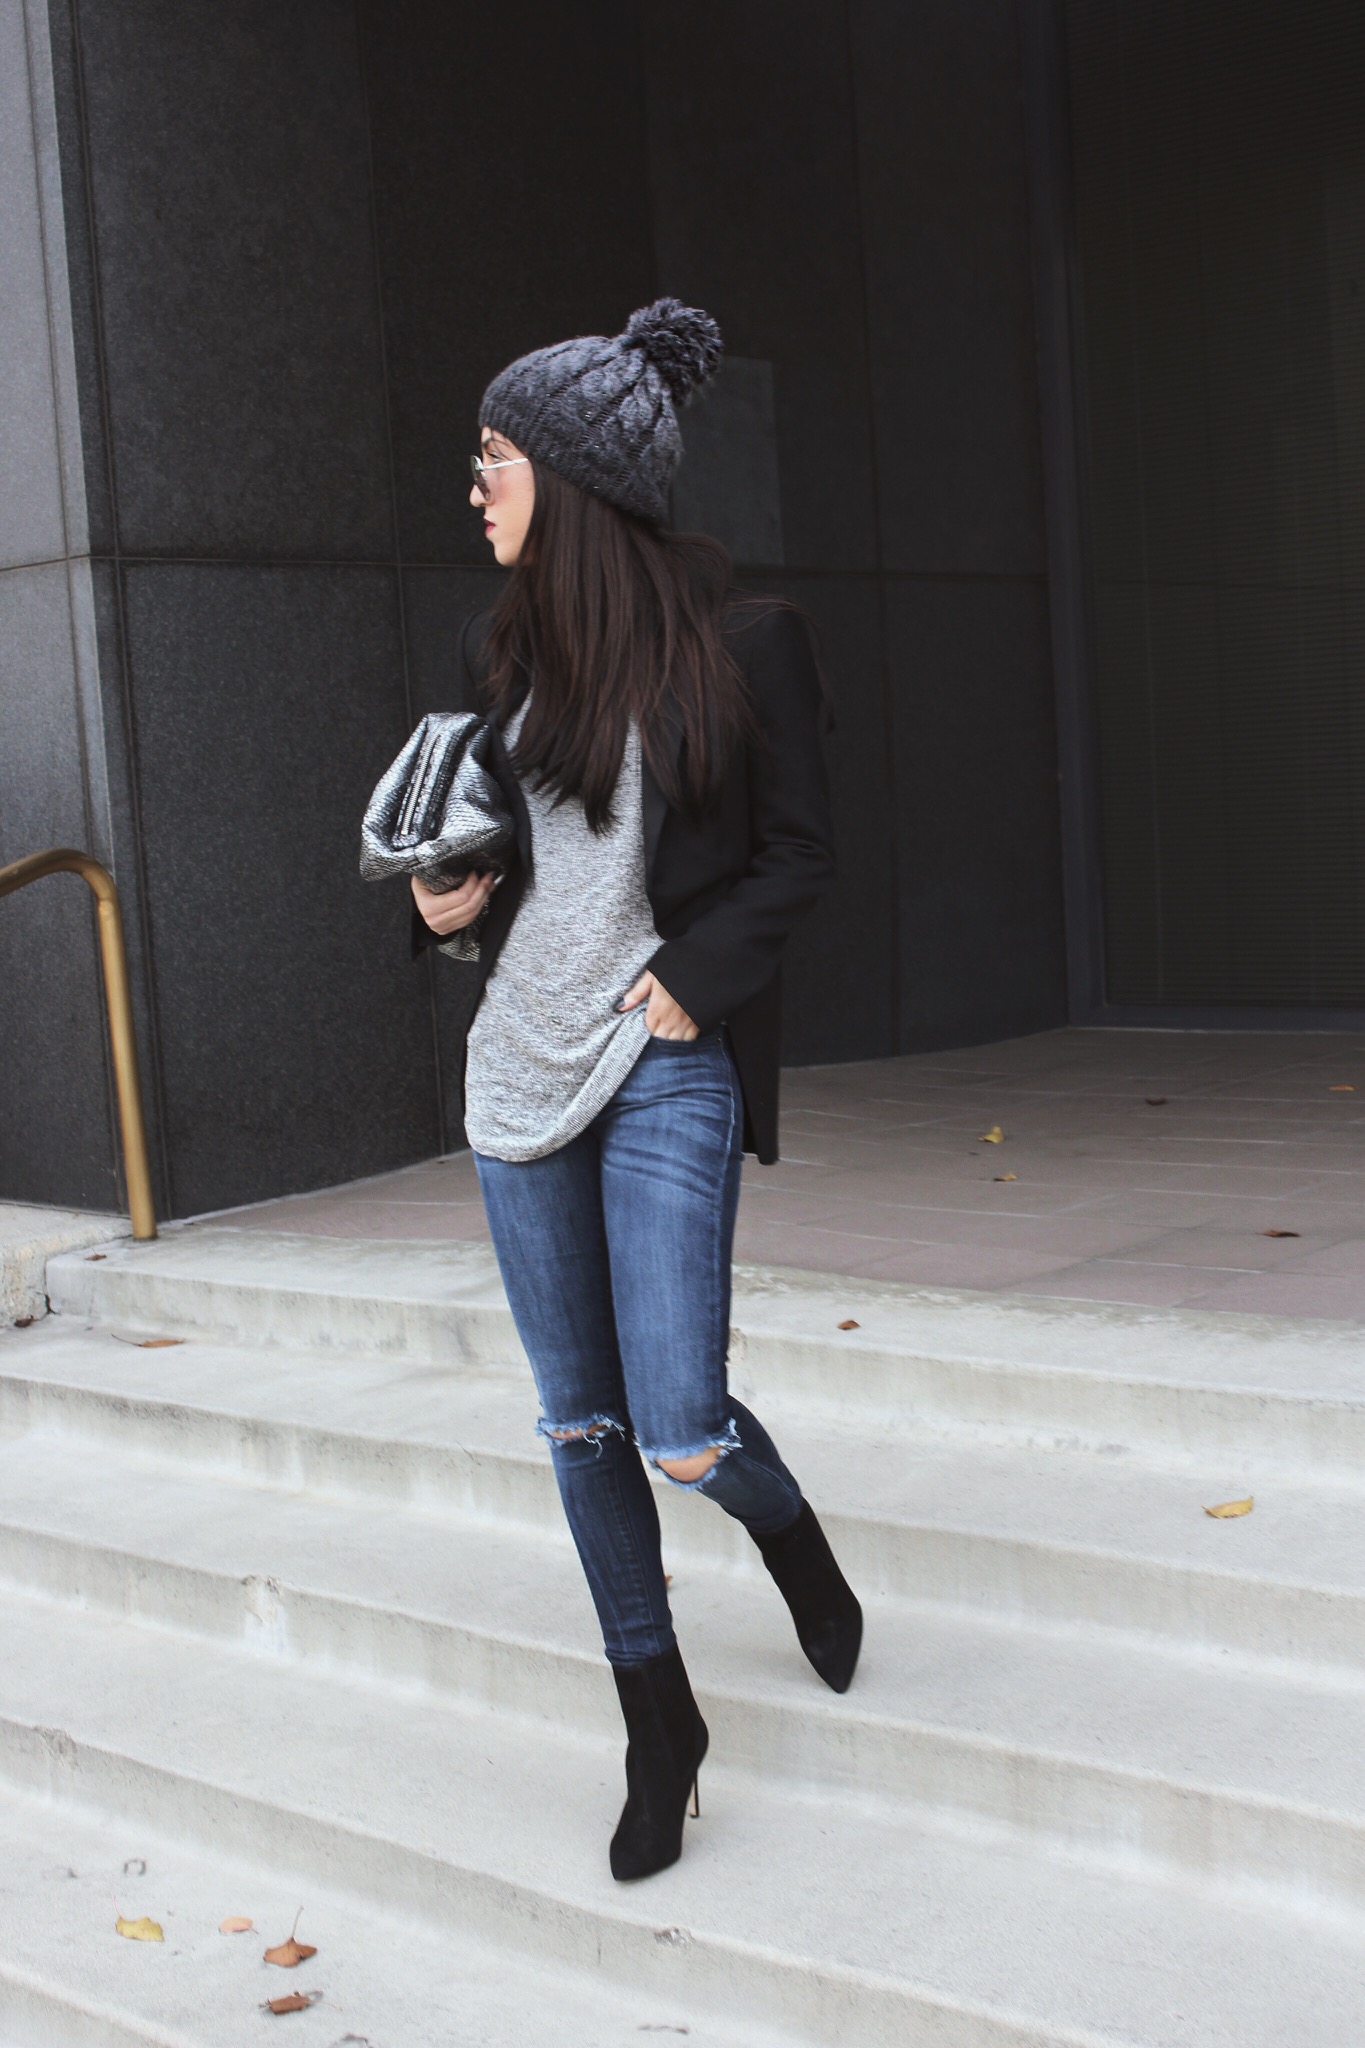 LA blogger Tania Sarin with knit beanie and metallic clutch